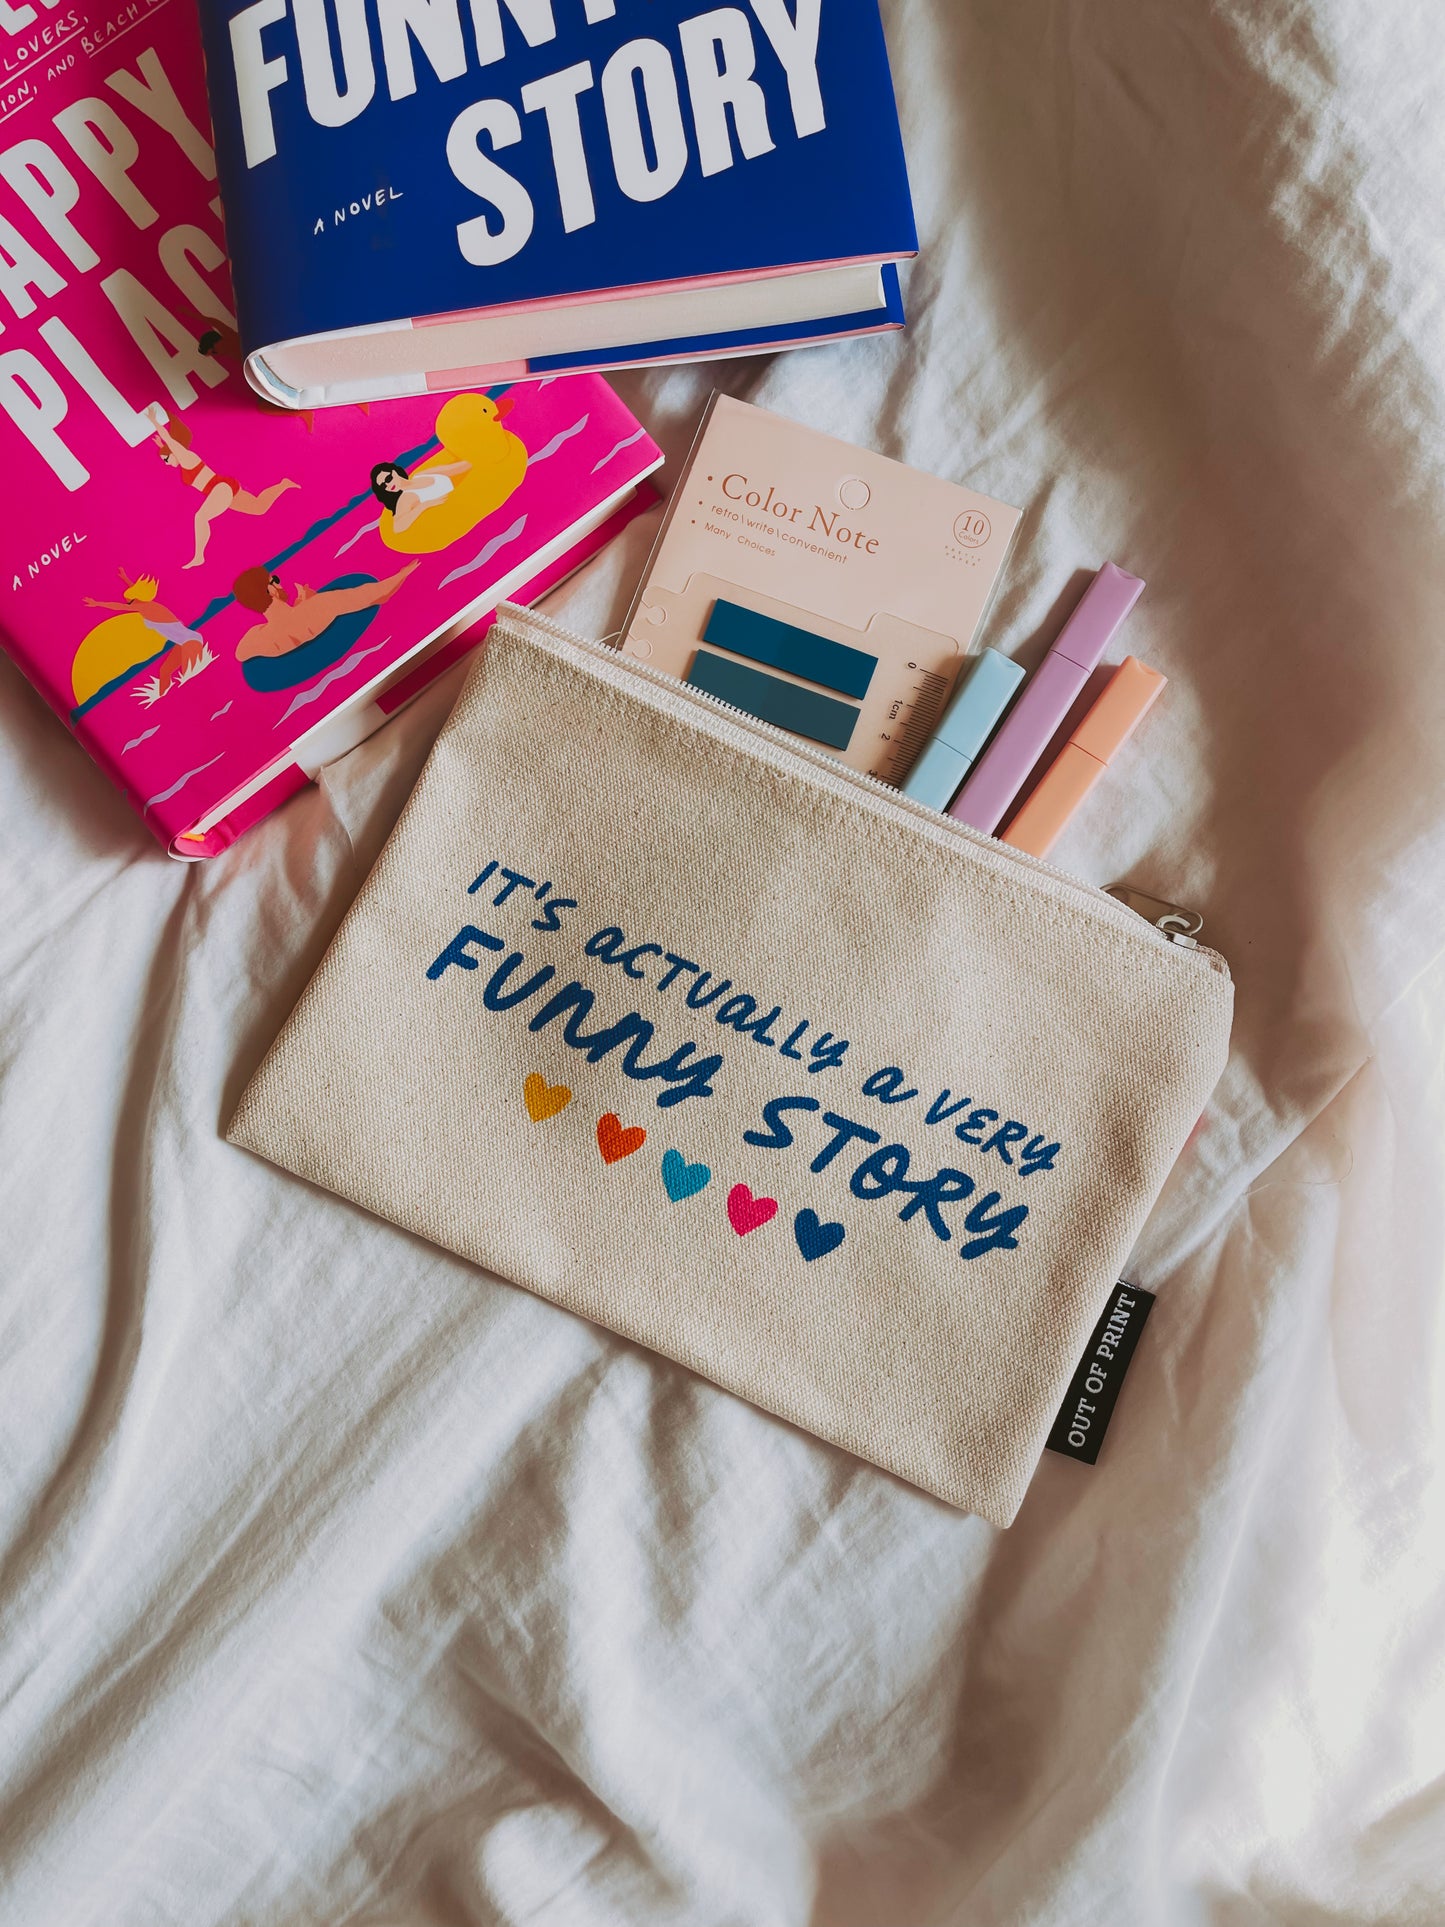 Funny Story Zip Pouch